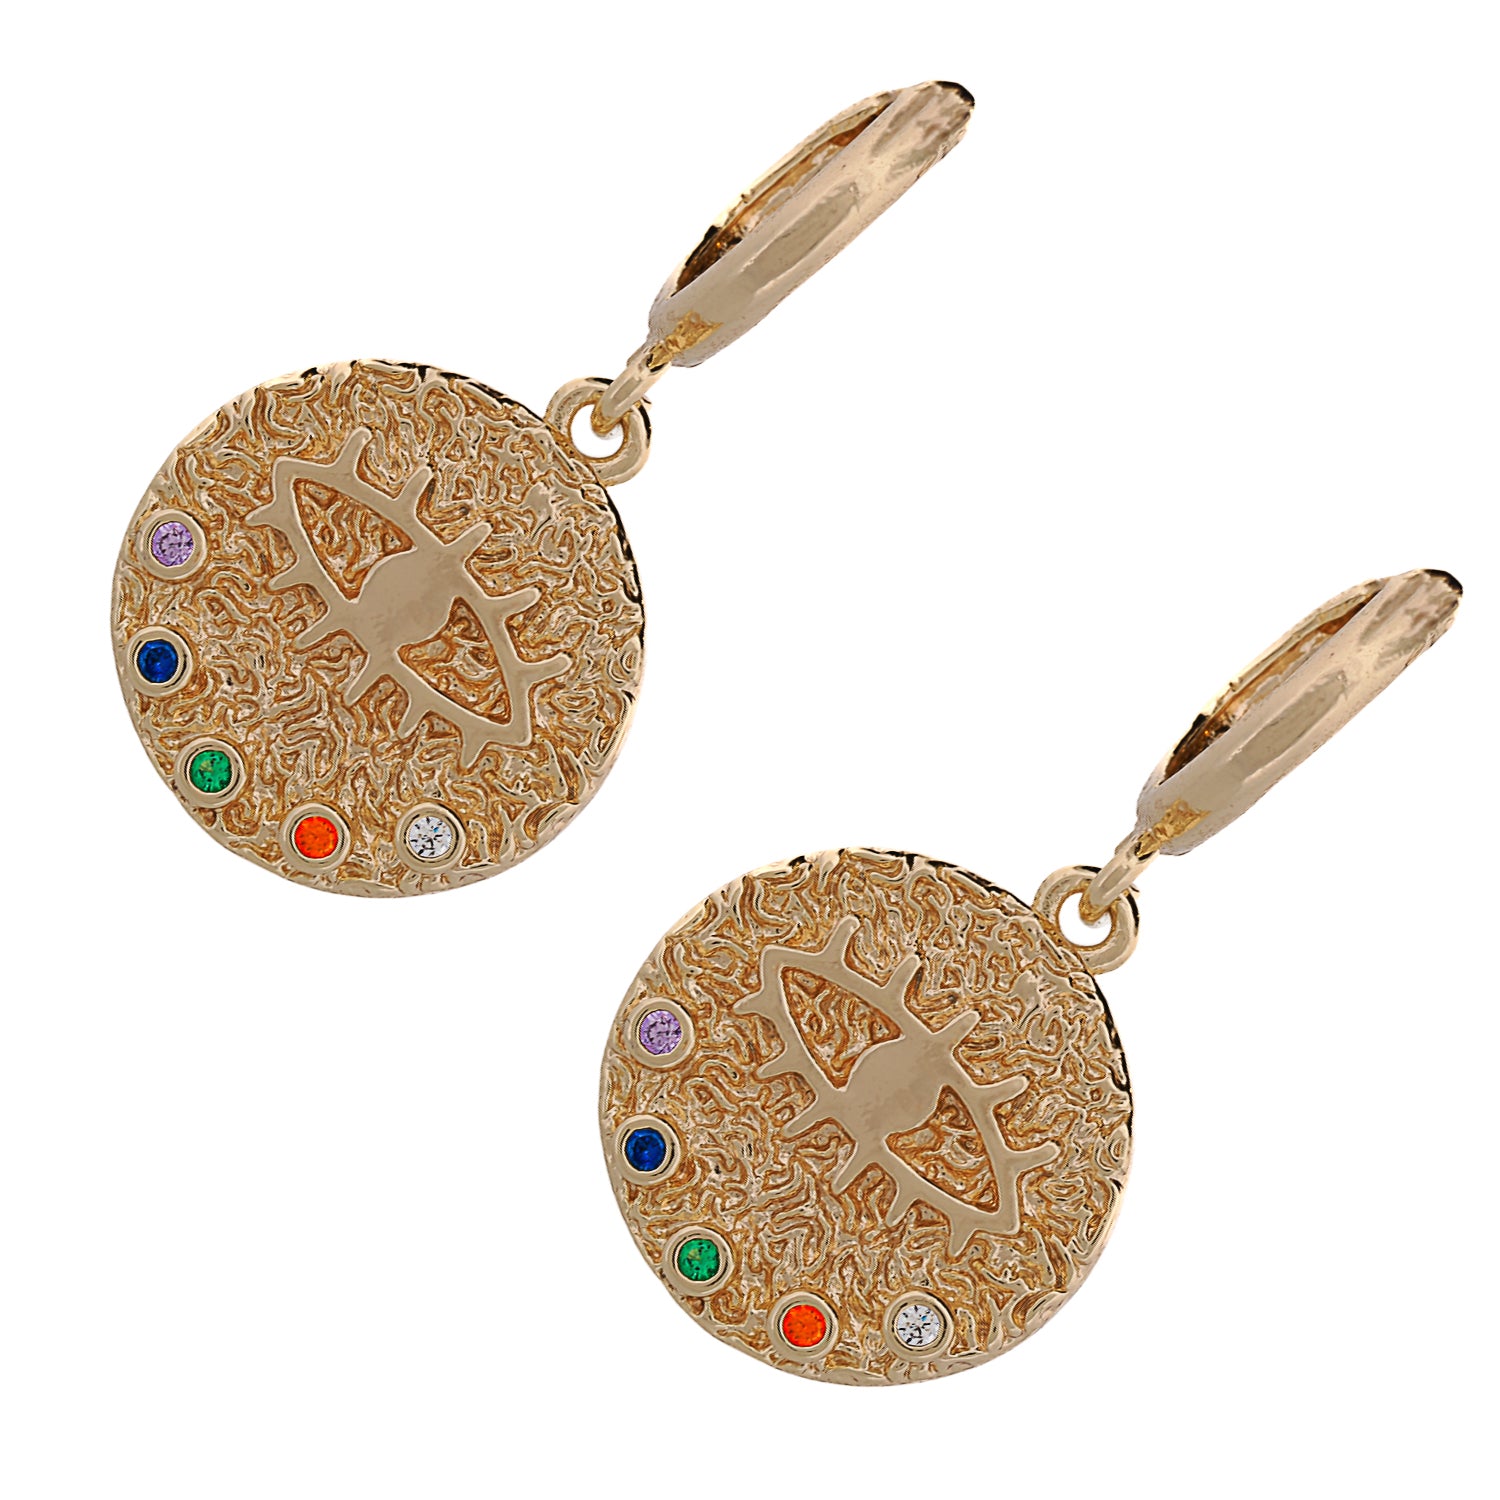 Handmade Evil Eye Gold Earrings, adorned with multicolor gemstones, a unique blend of beauty and protection.